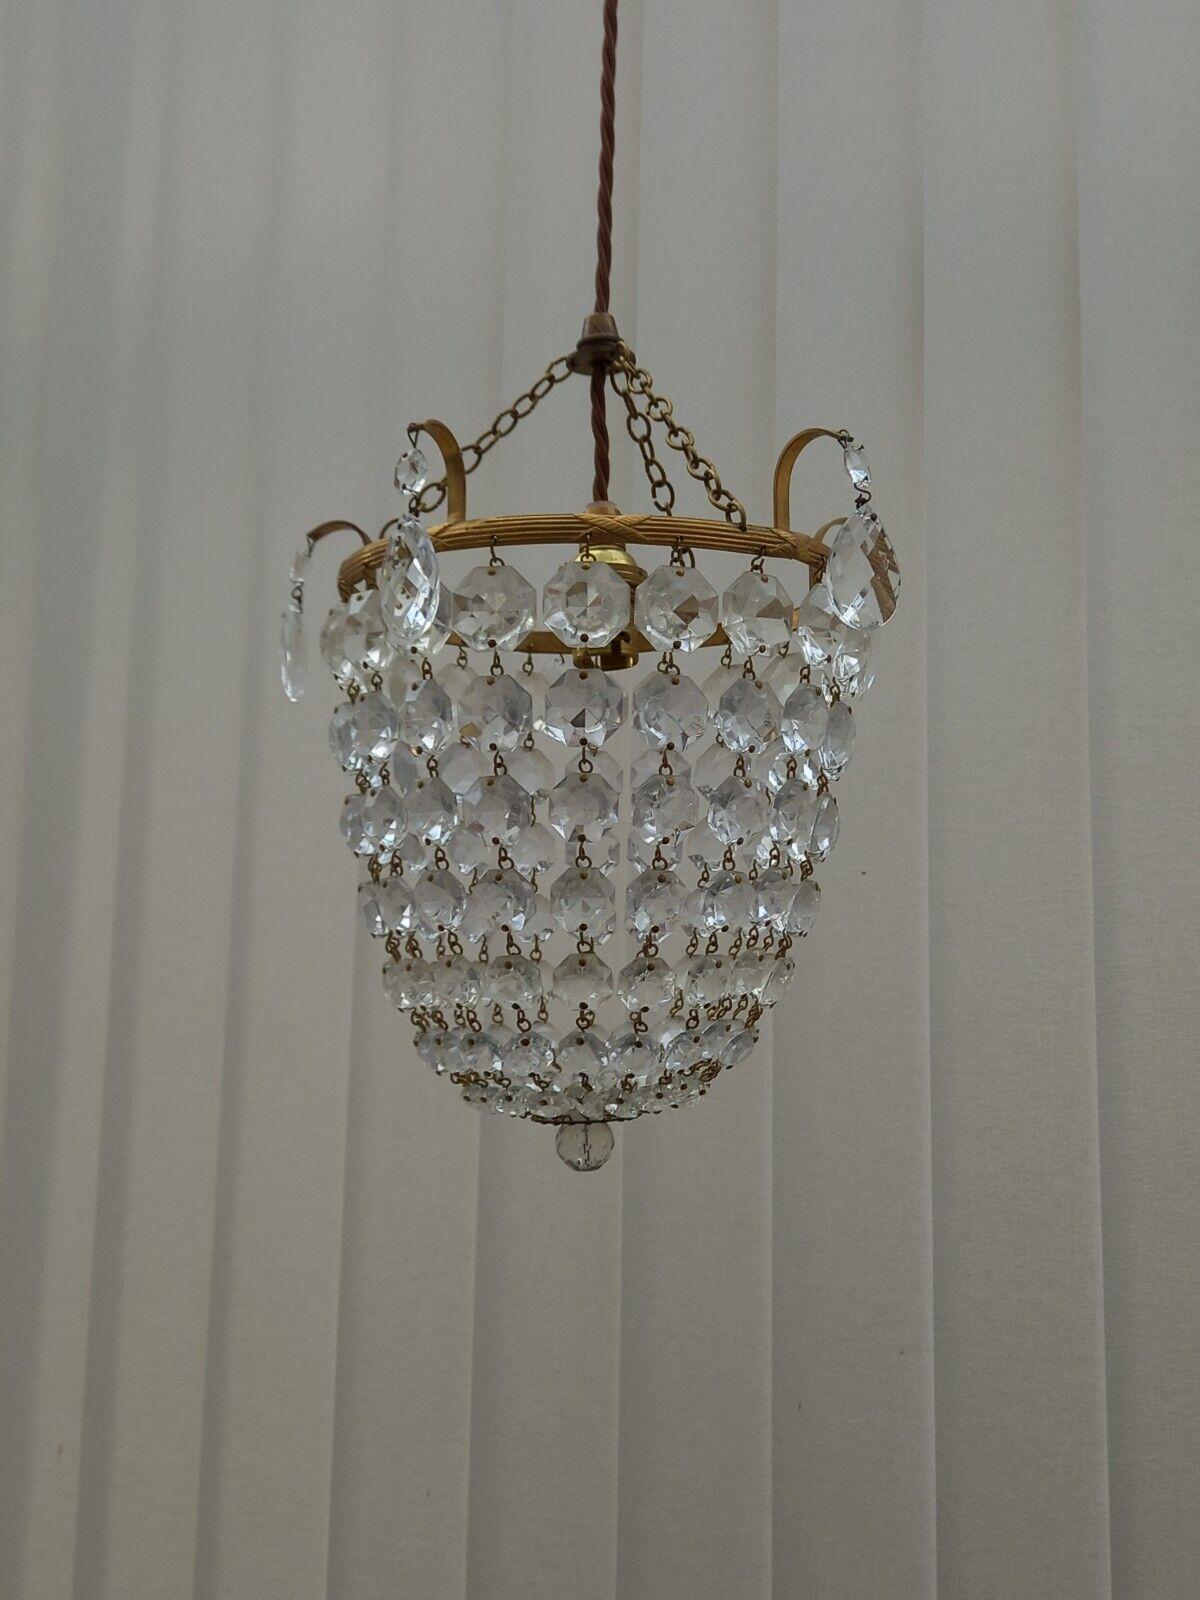 Late 19th Century 19thc British Empire Bronze with Cut Crystal Lantern style Pendant/ Chandelier For Sale